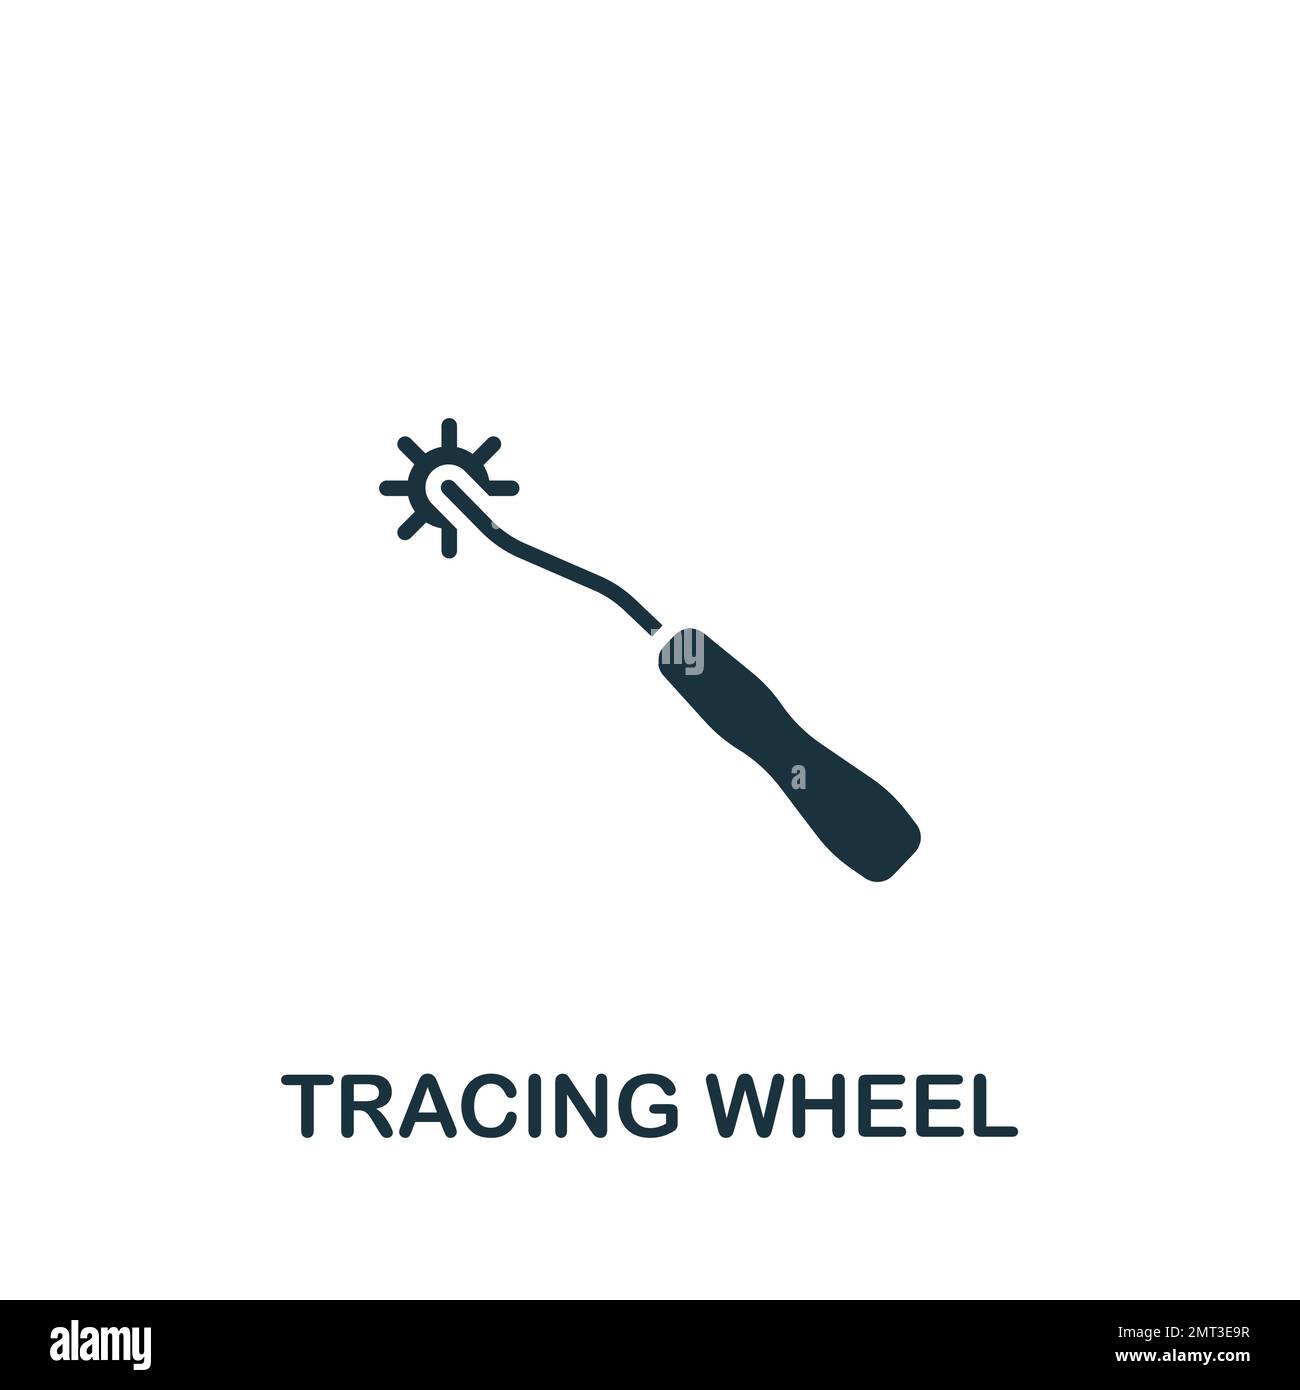 Tracing Wheel Icon - Download in Line Style